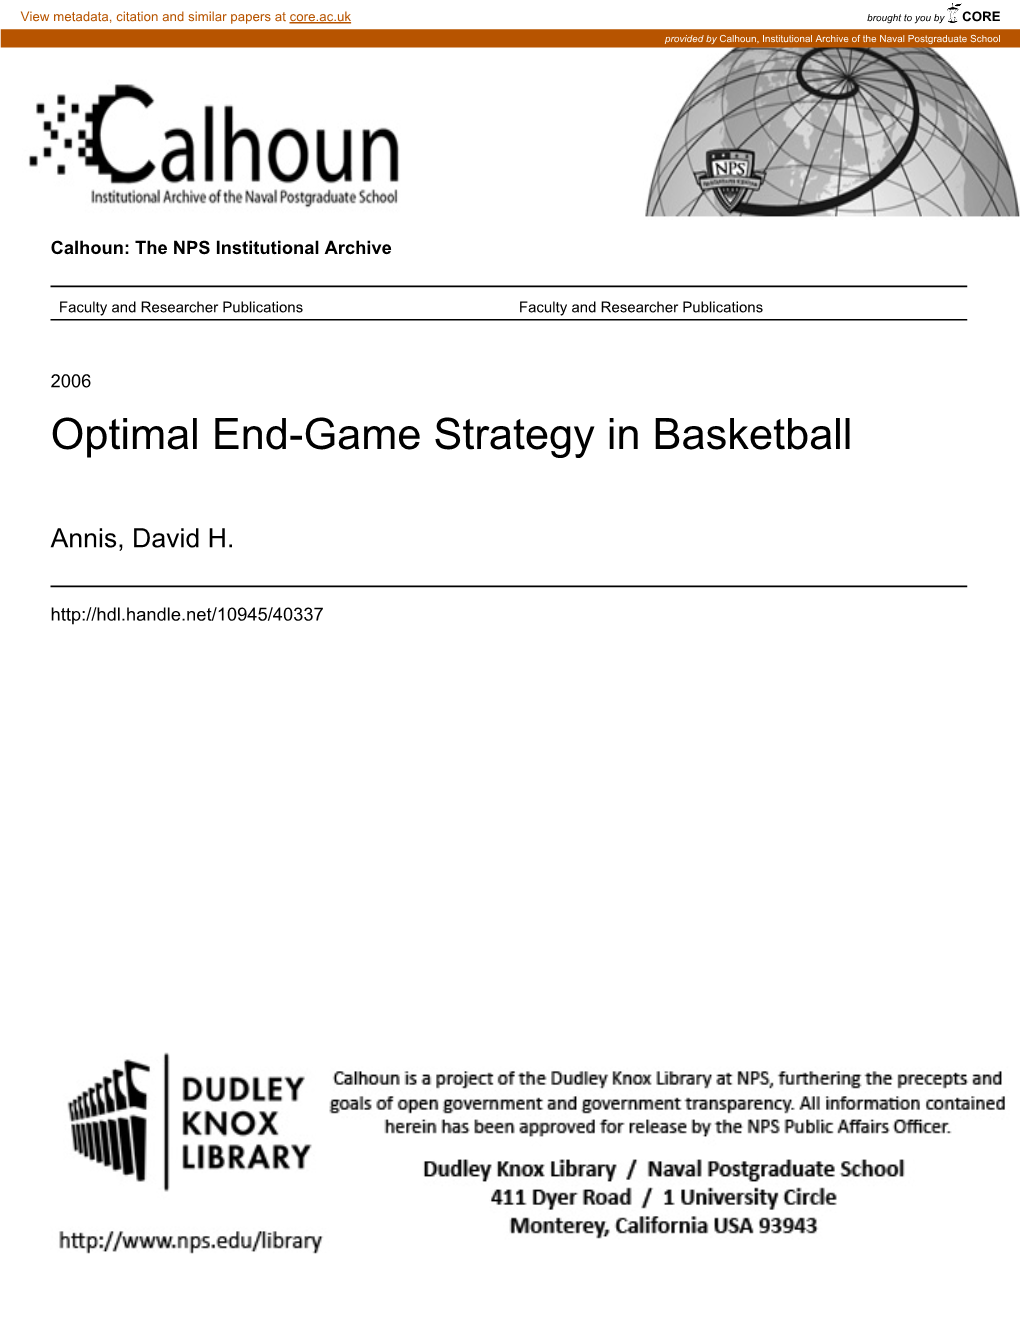 Optimal End-Game Strategy in Basketball